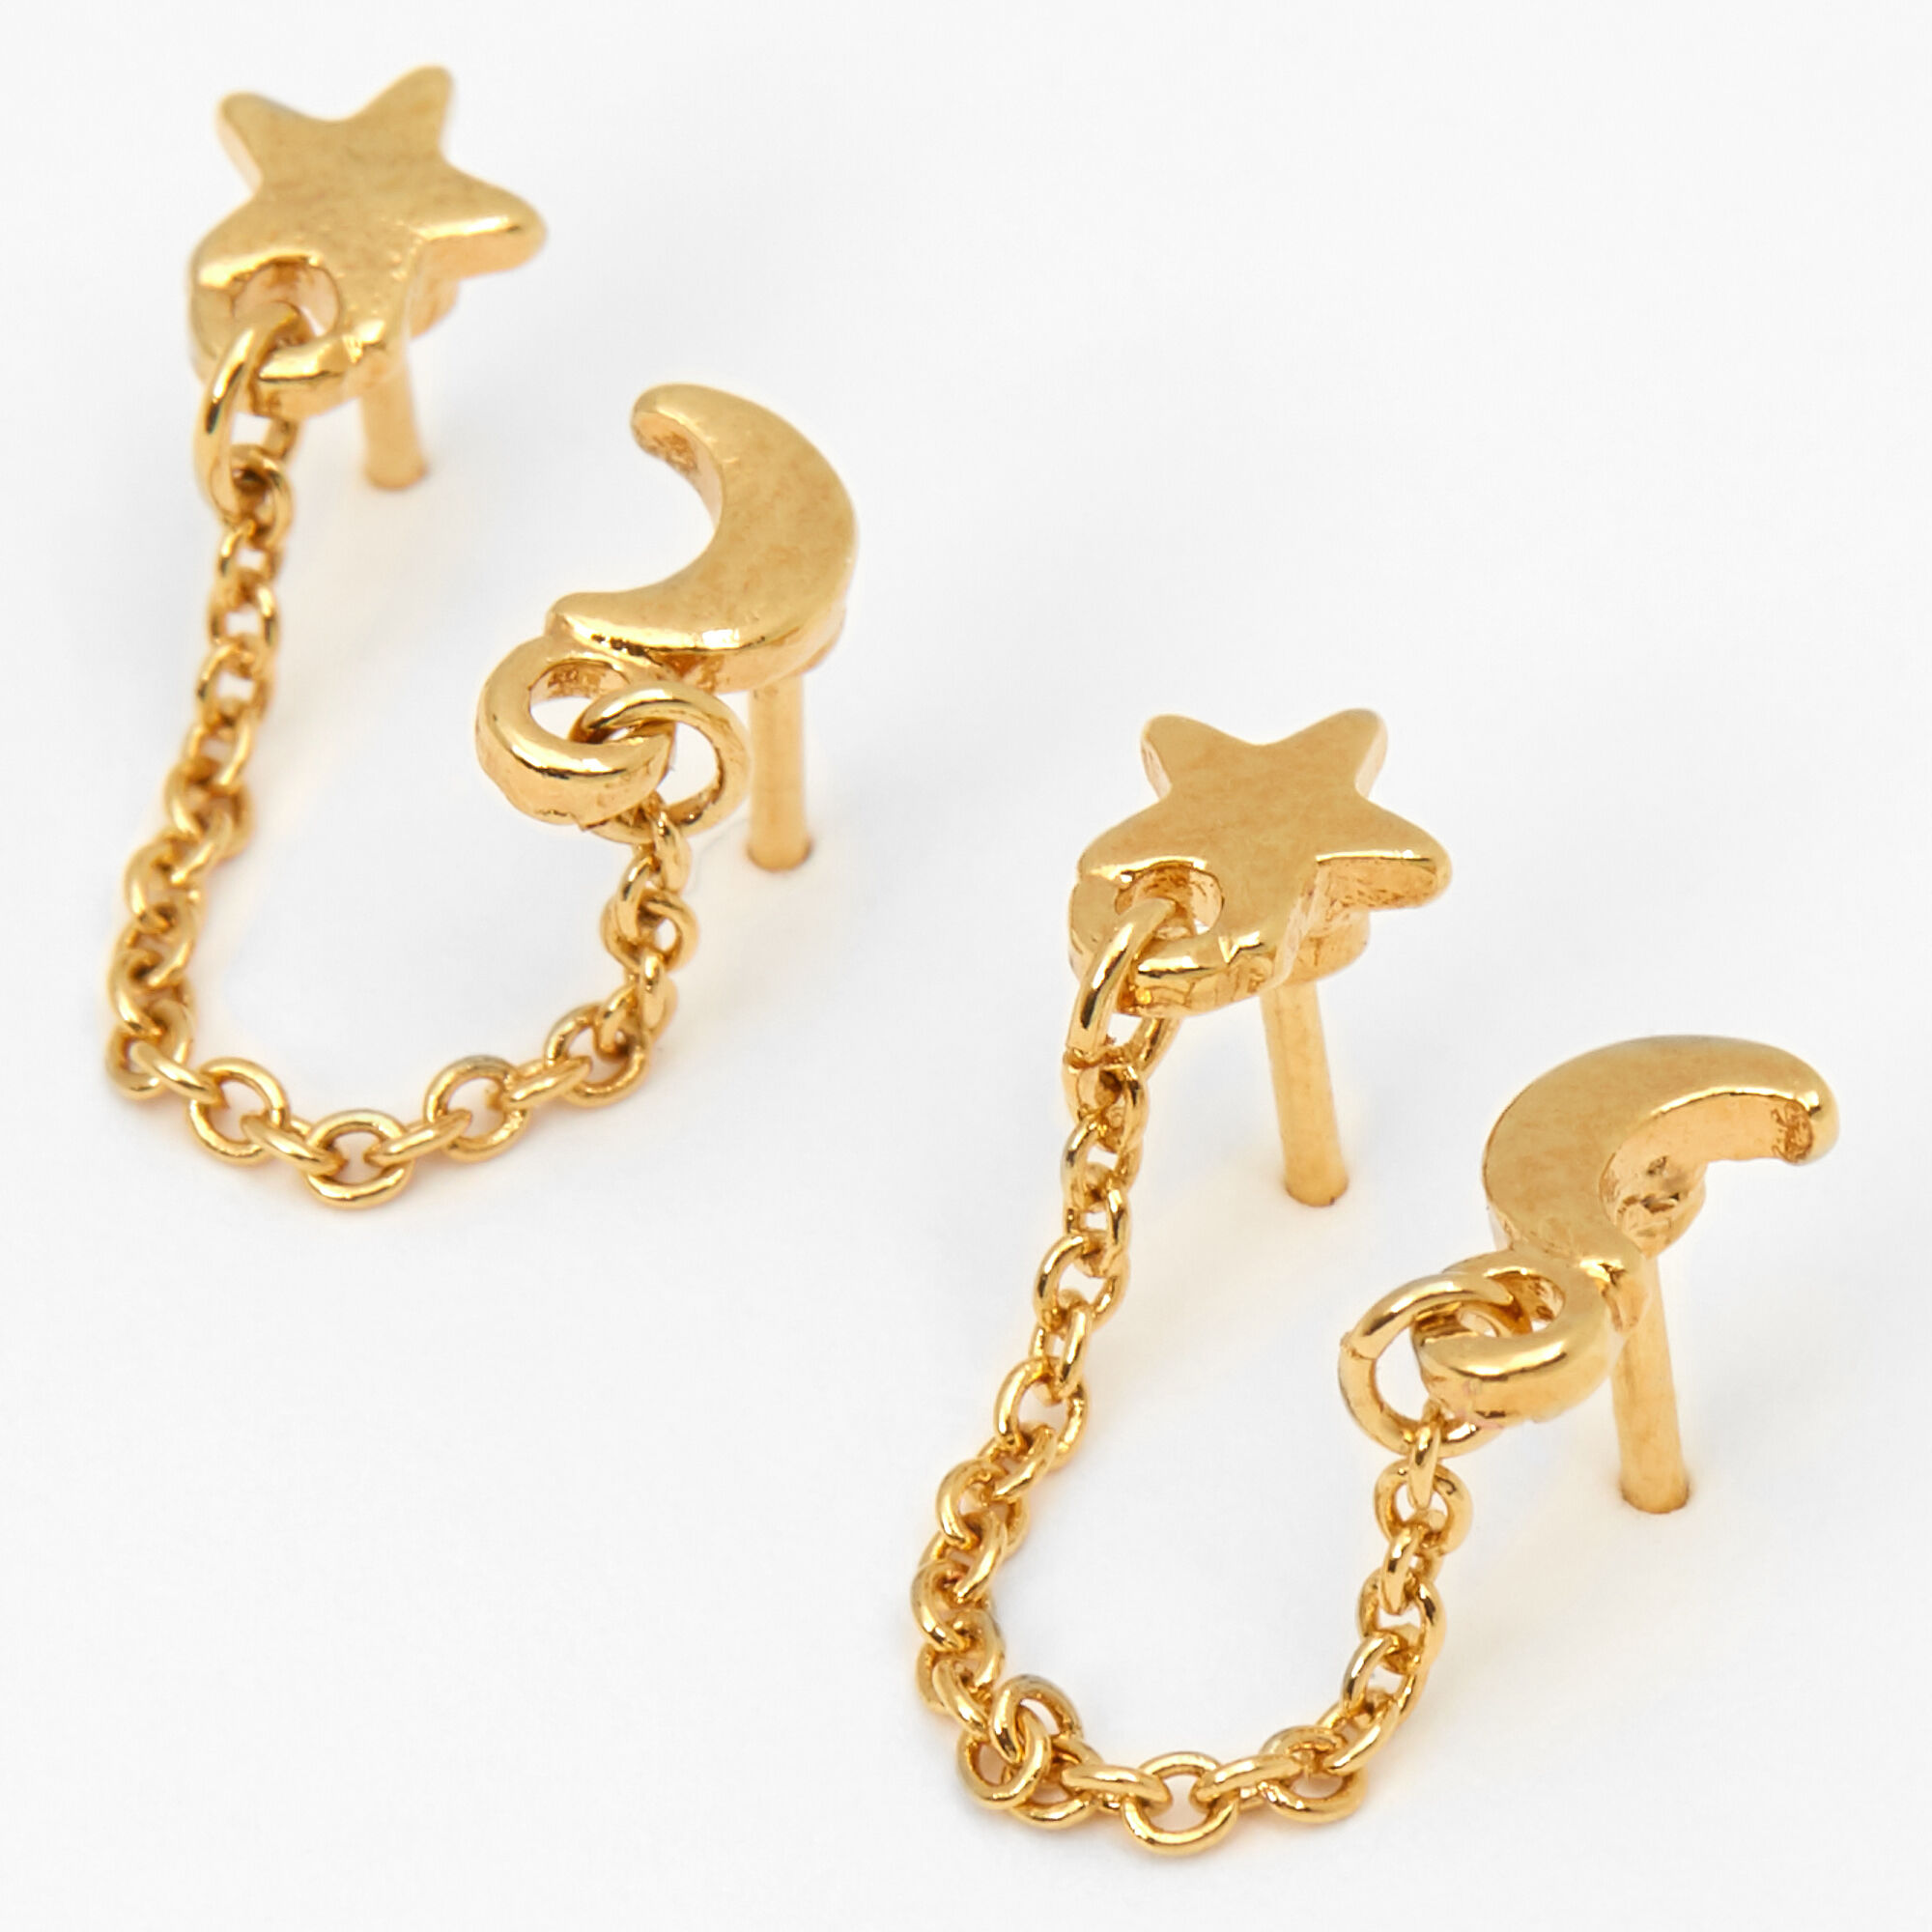 Claires Gold Fashion Earrings for sale  eBay